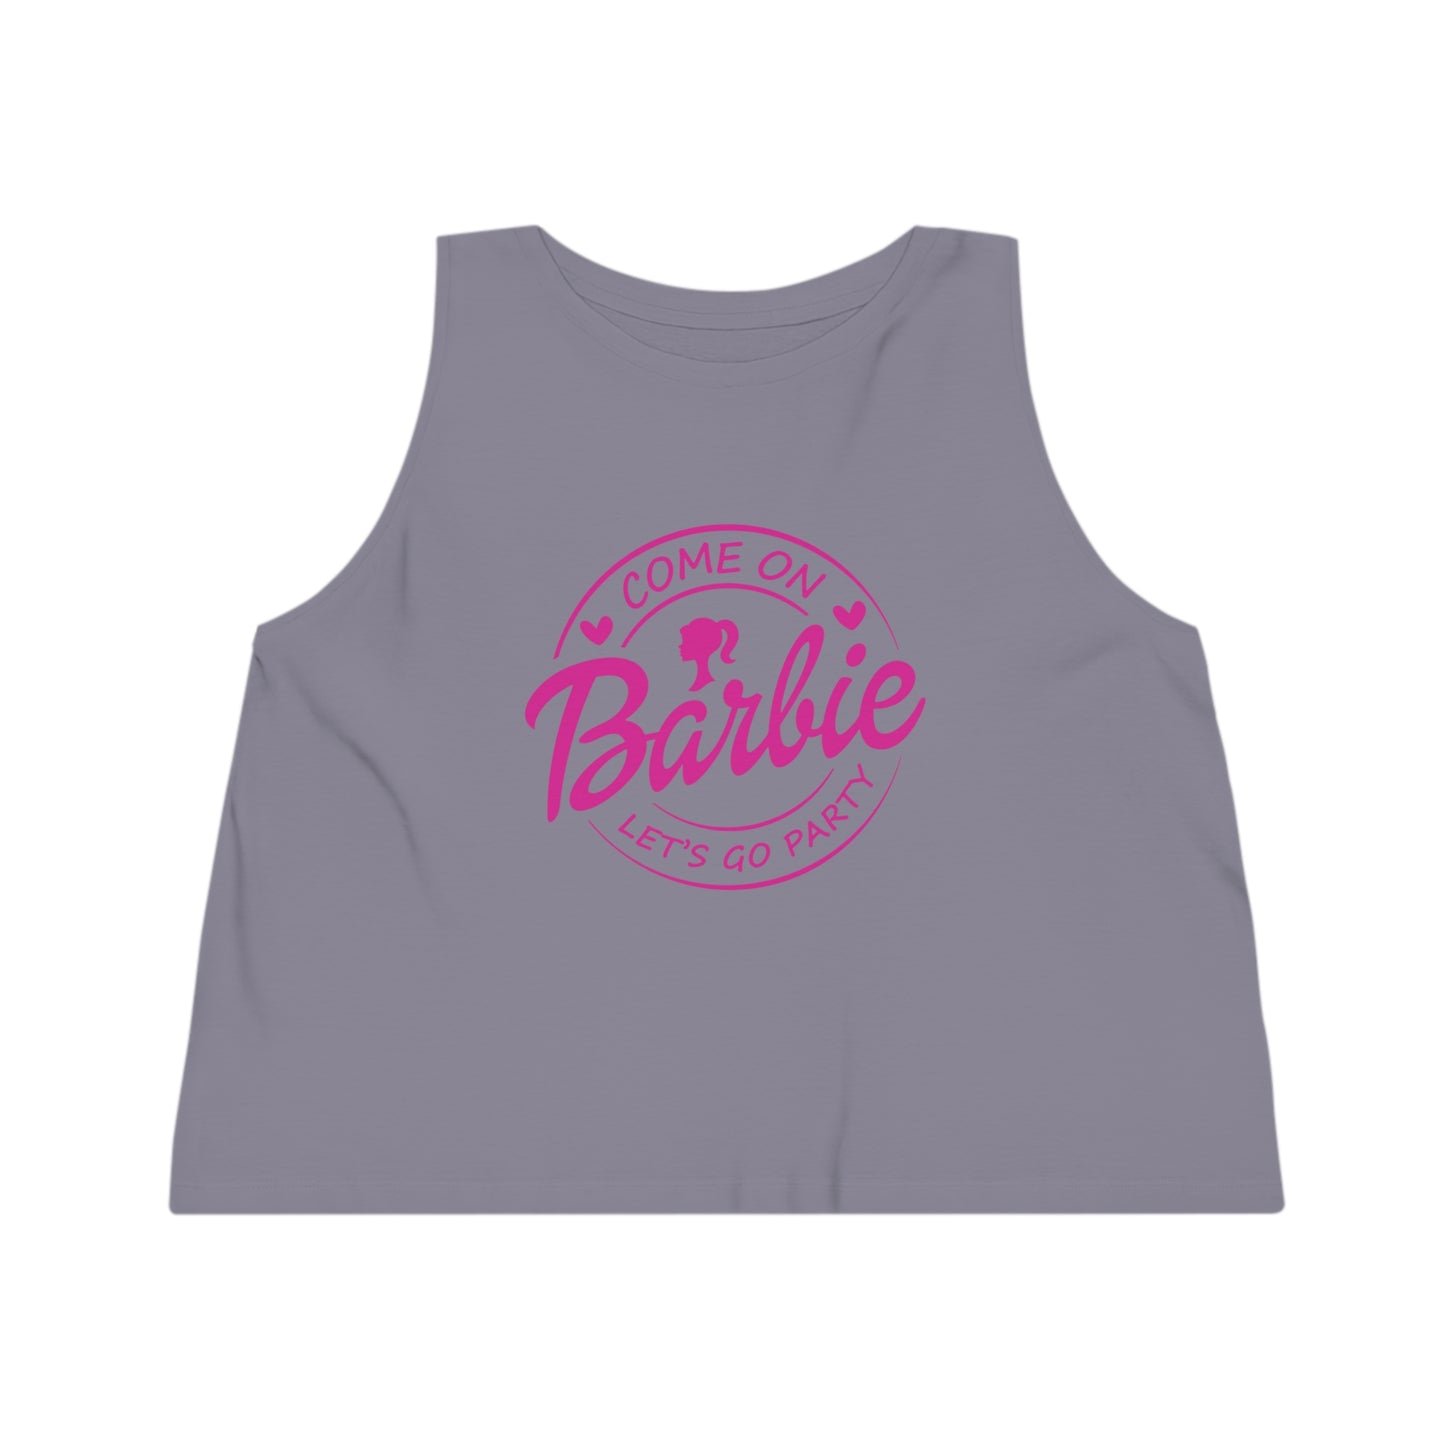 Barbie Movie Logo Cropped Tank Top, Come on Barbie Lets Go Party Tank Top Women's Dancer Cropped Tank Top